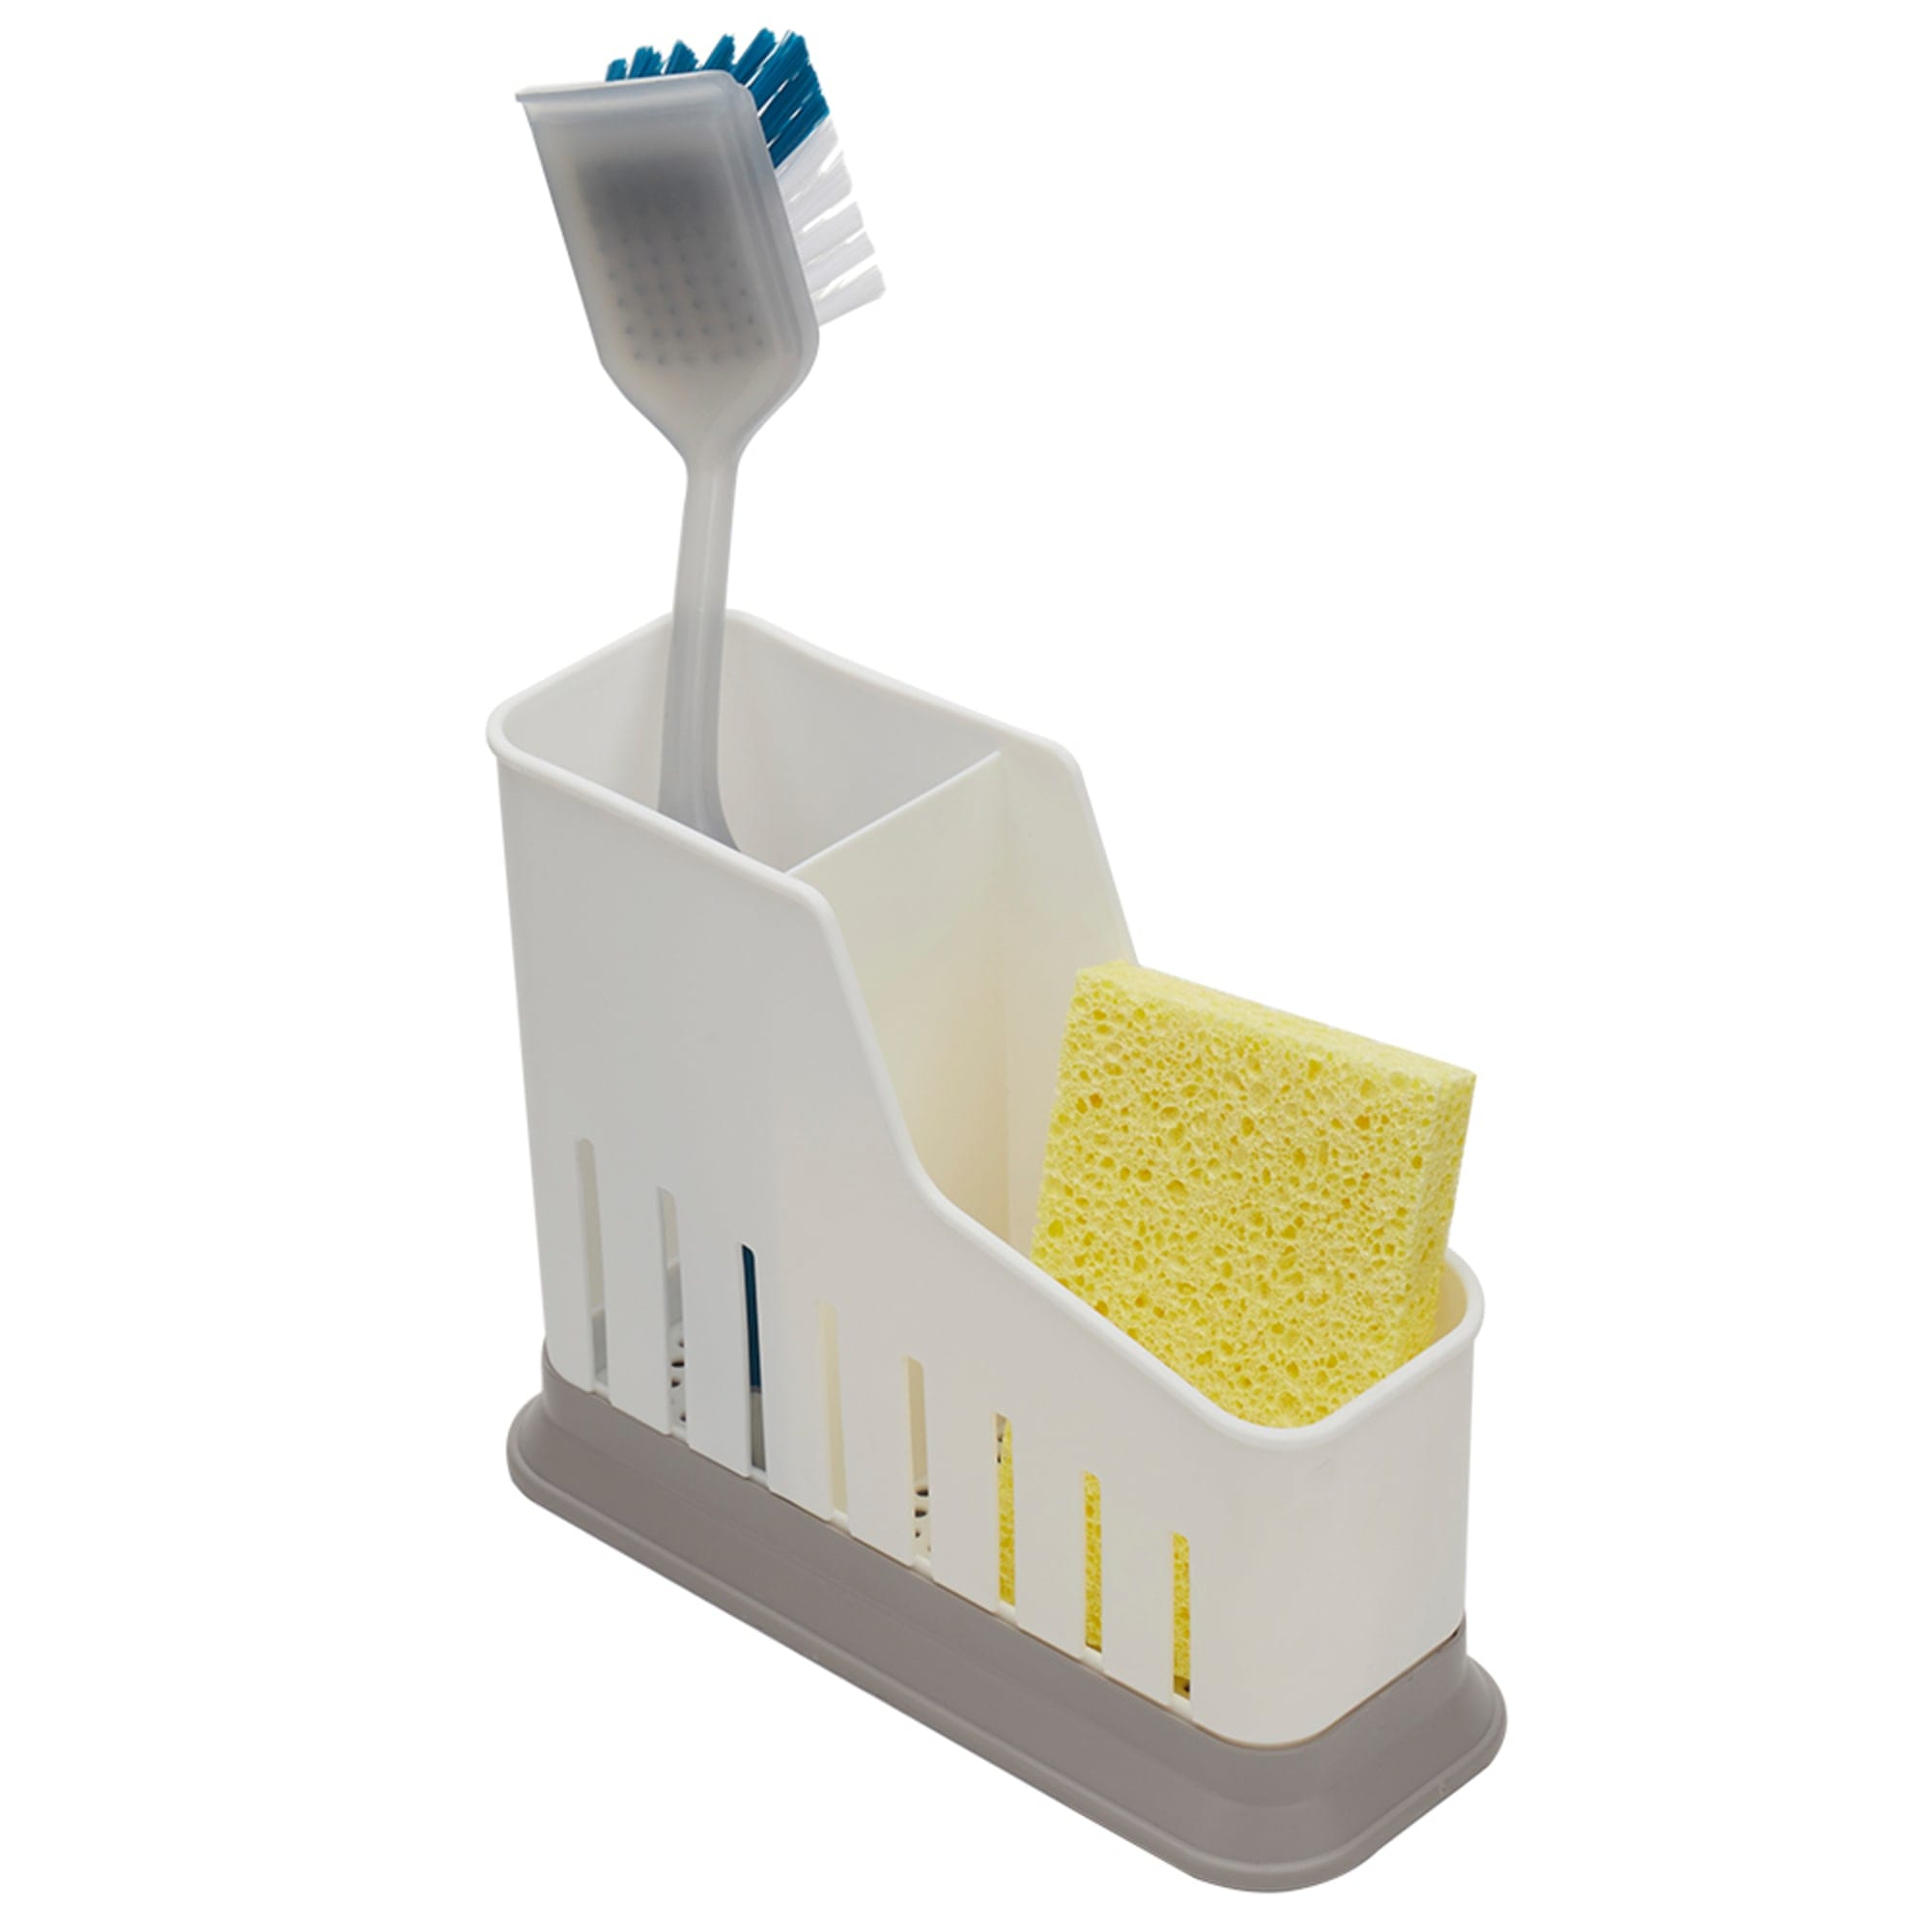 Home Basics 2 Compartment Sponge and Brush Holder with Removable Bottom
	
 $3.00 EACH, CASE PACK OF 12